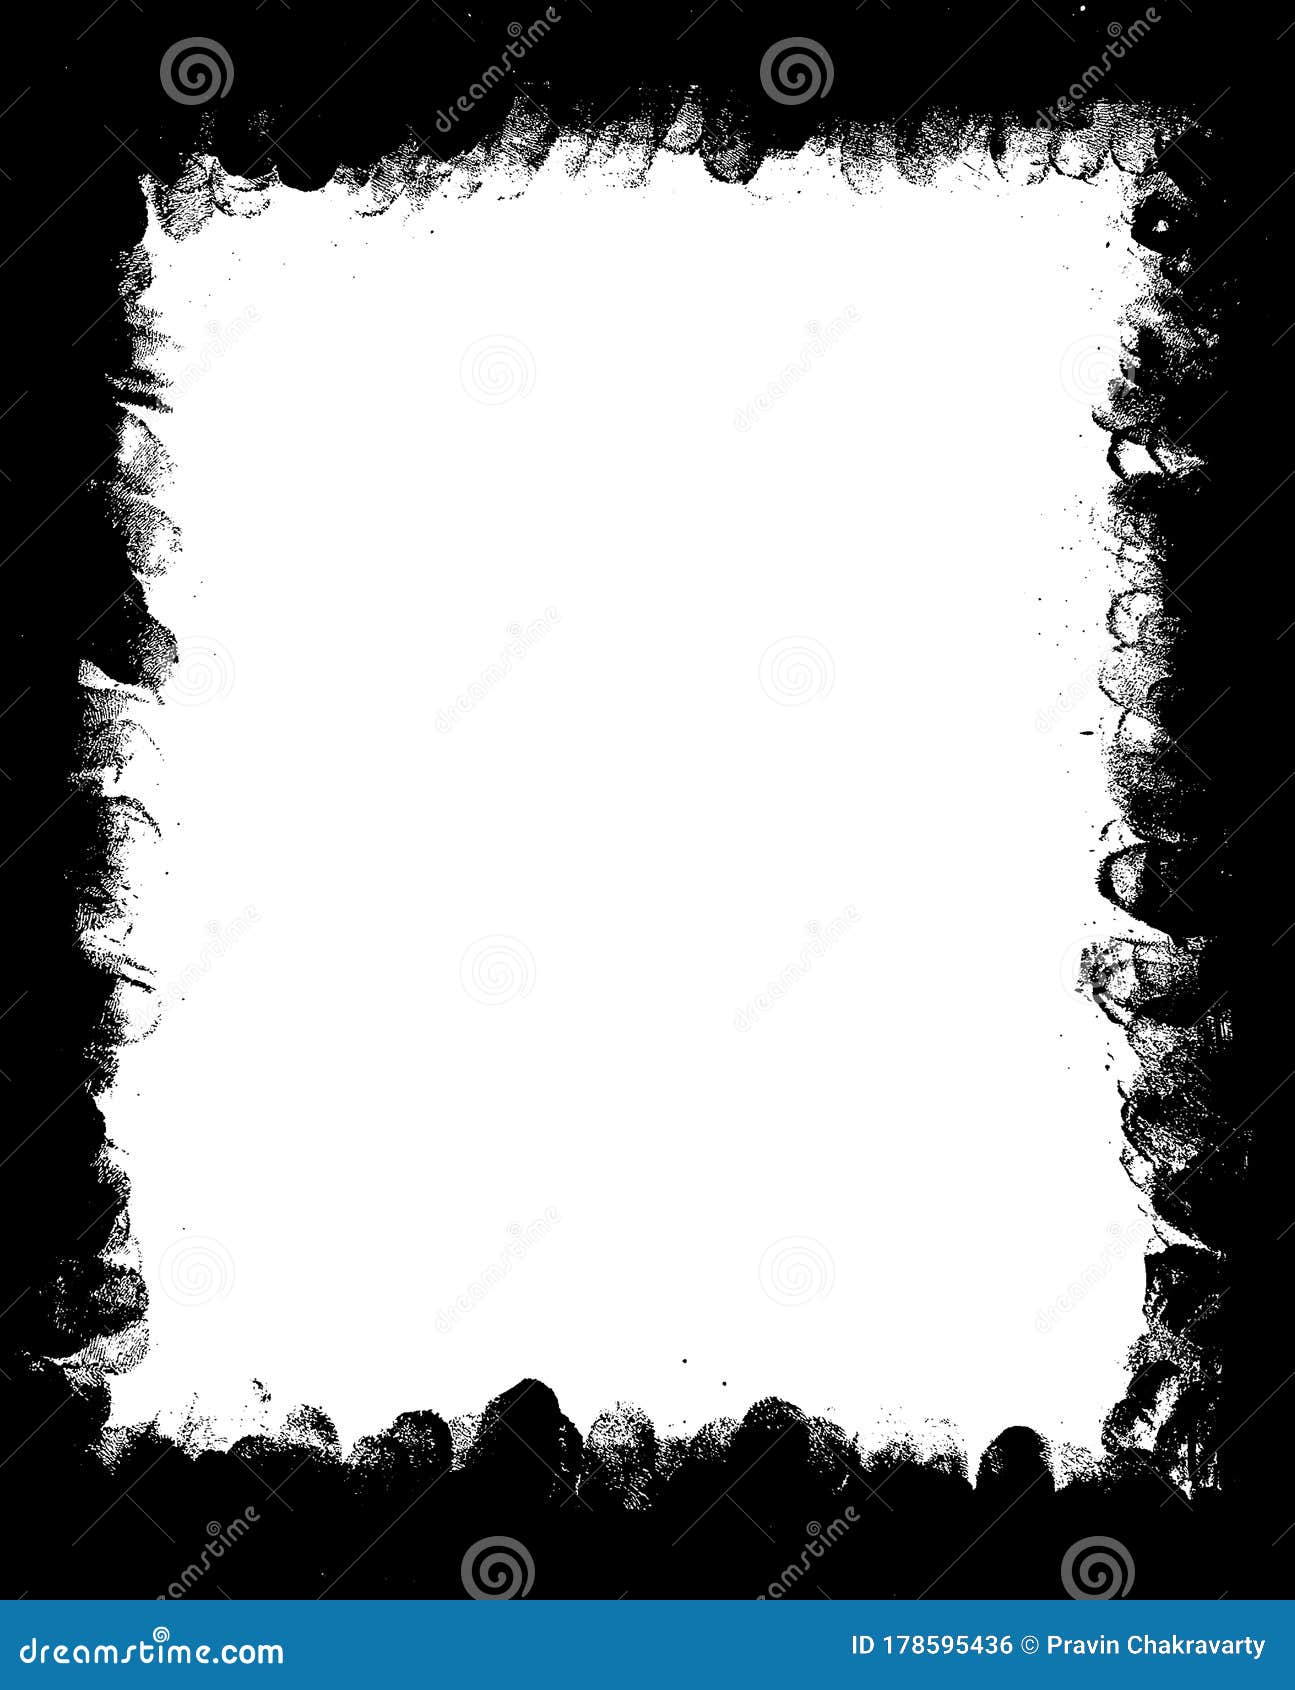 Grunge Border Or Frames Vector. Black And White Texture. Stock ...